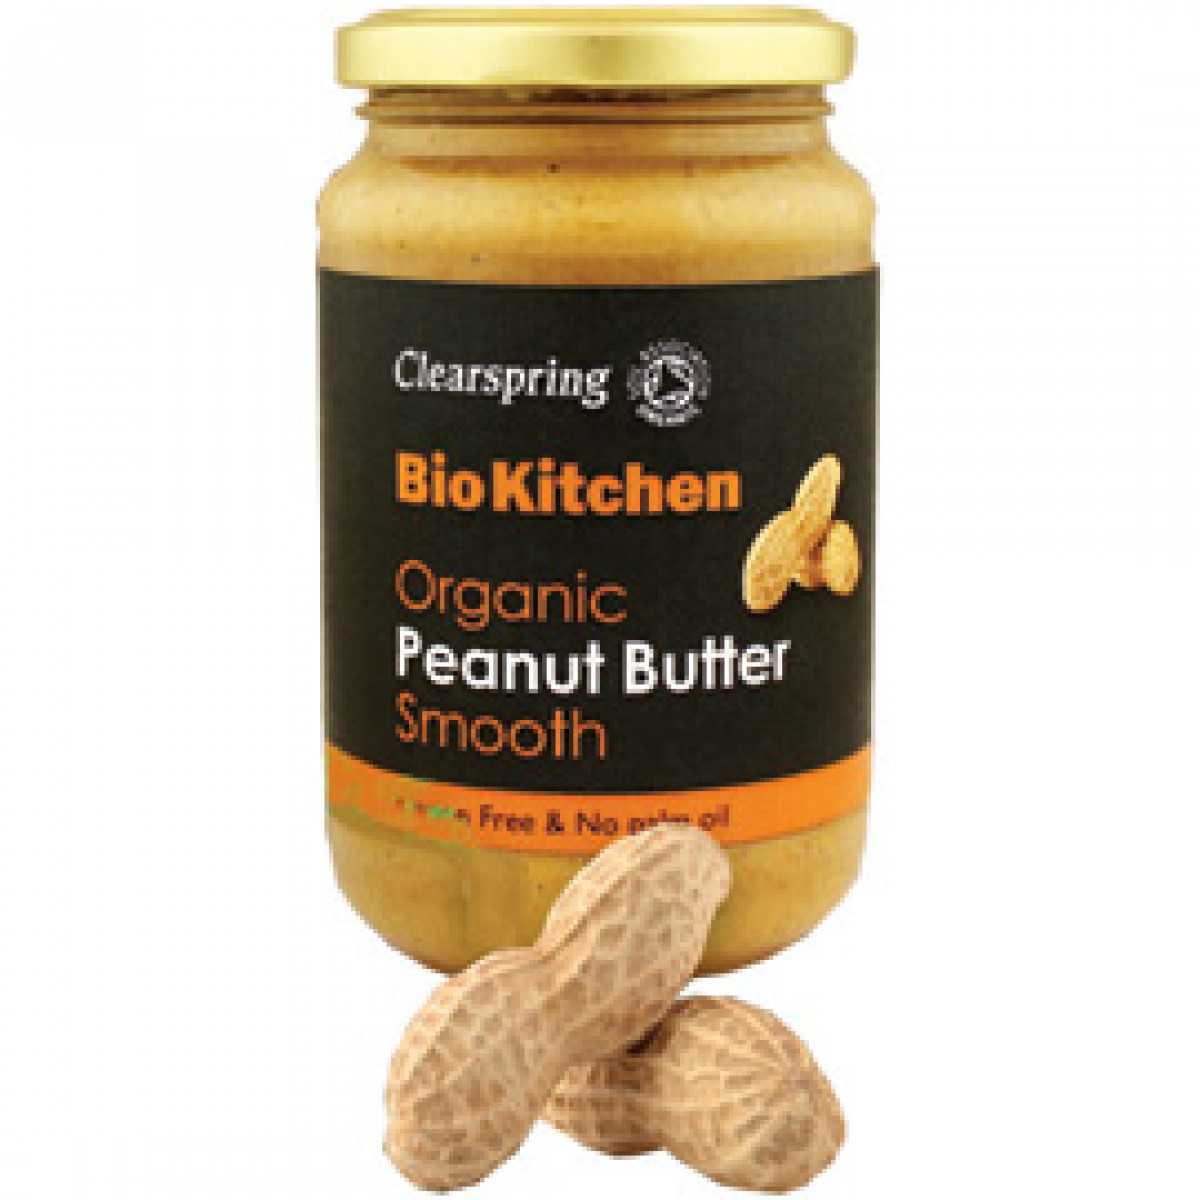 Product picture for Peanut Butter Smooth